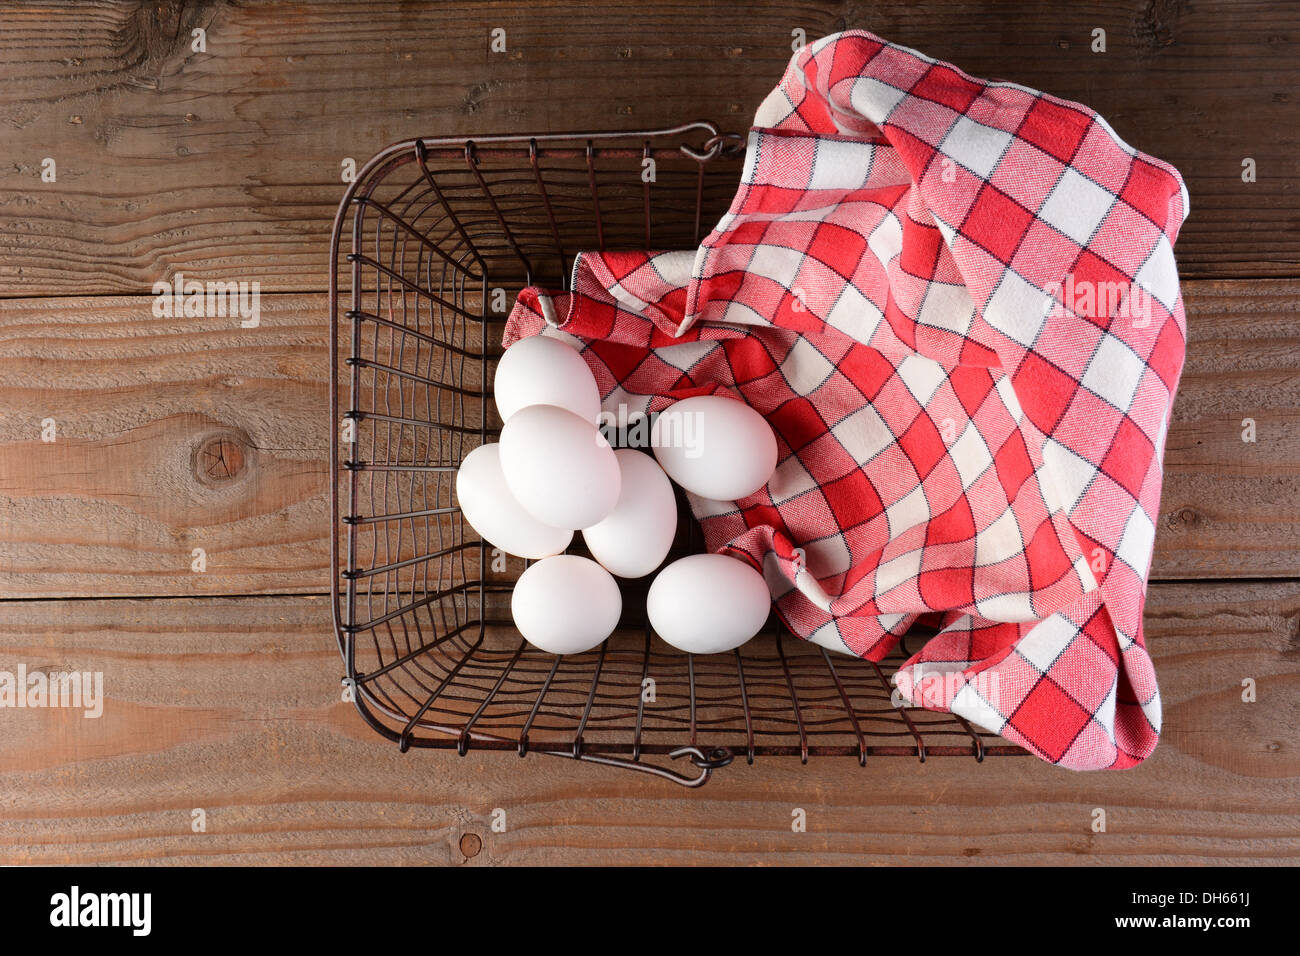 A wire basket with eggs and a red checkered napkin on a rustic wood surface. Stock Photo